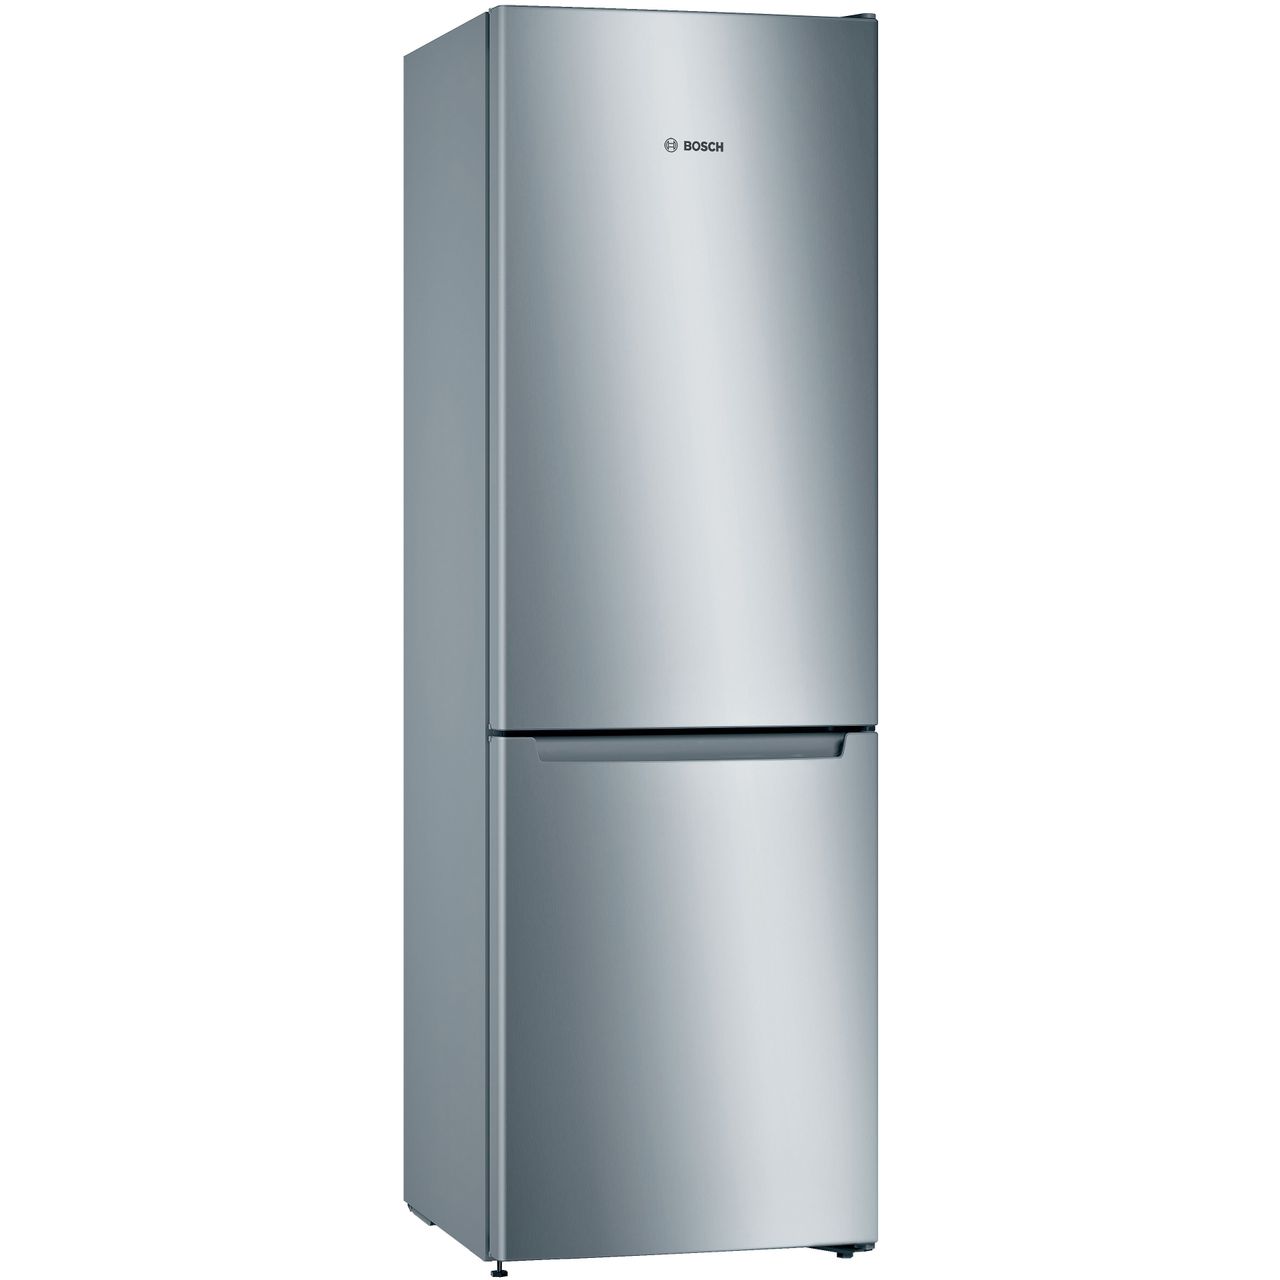 Bosch Series 2 KGN33NLEAG 60/40 Frost Free Fridge Freezer - Stainless Steel Effect - E Rated, Stainless Steel